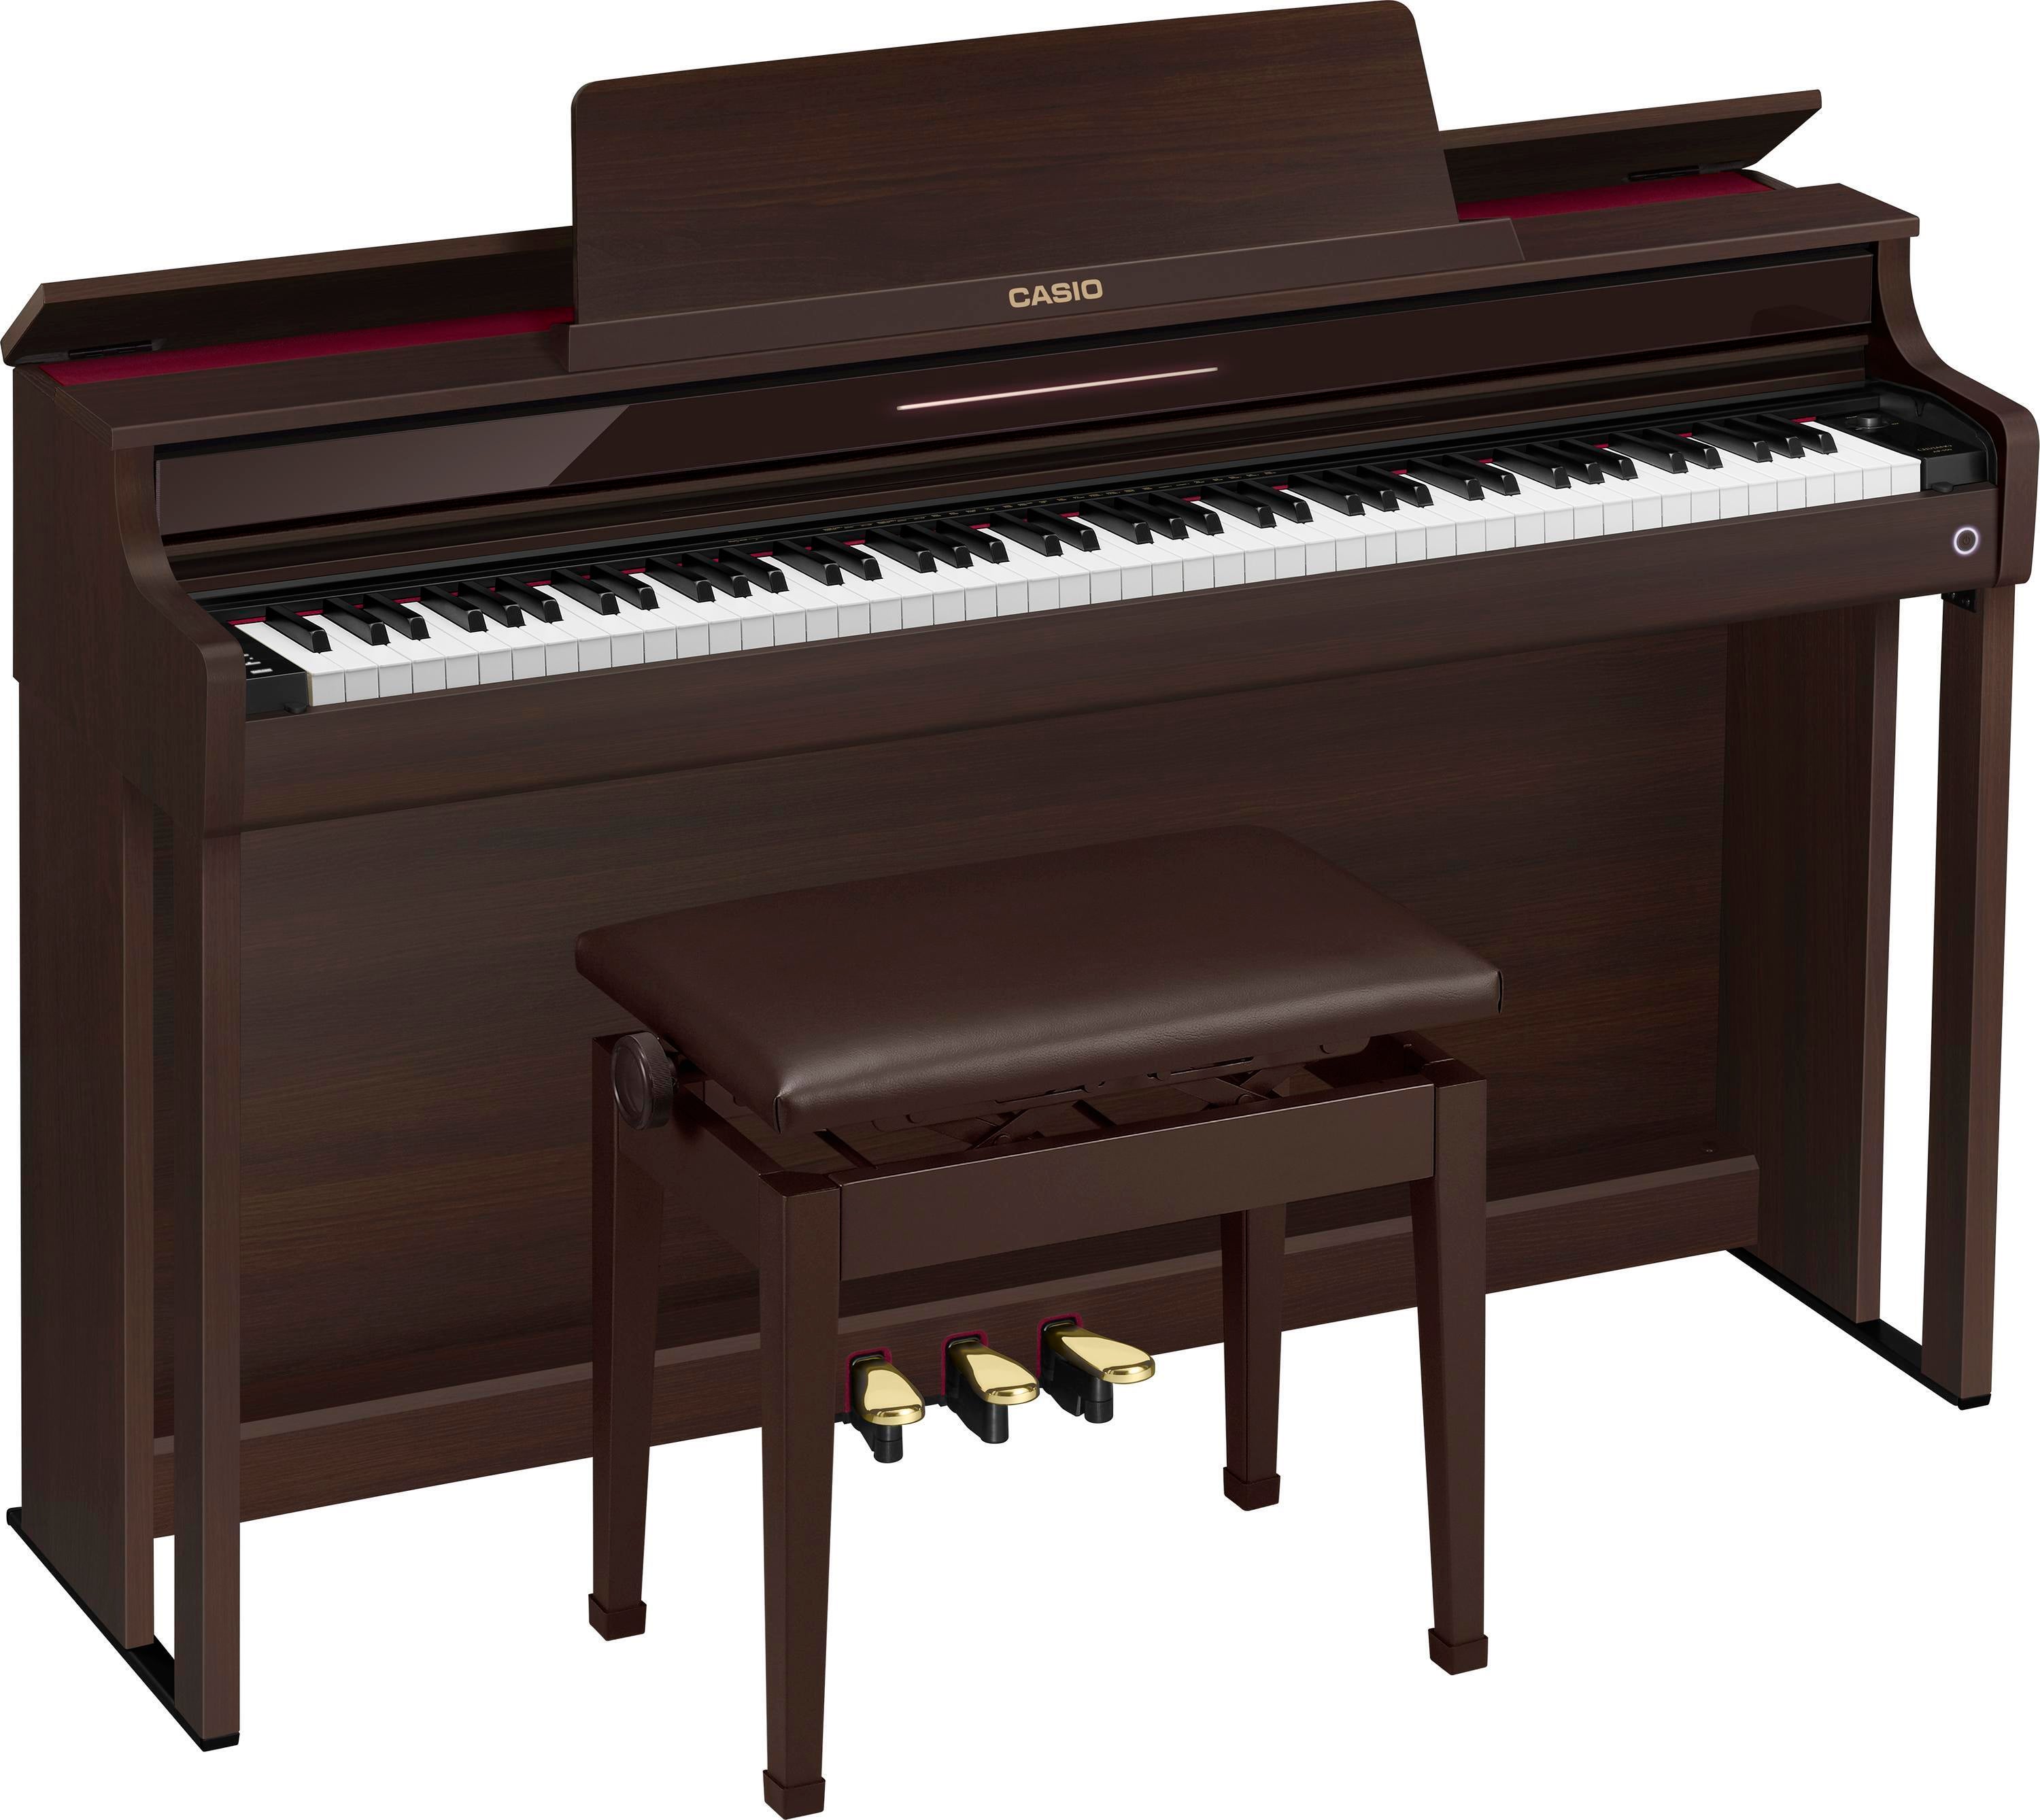 New Casio AP-750 Celviano Digital Upright Piano with Bench - Black